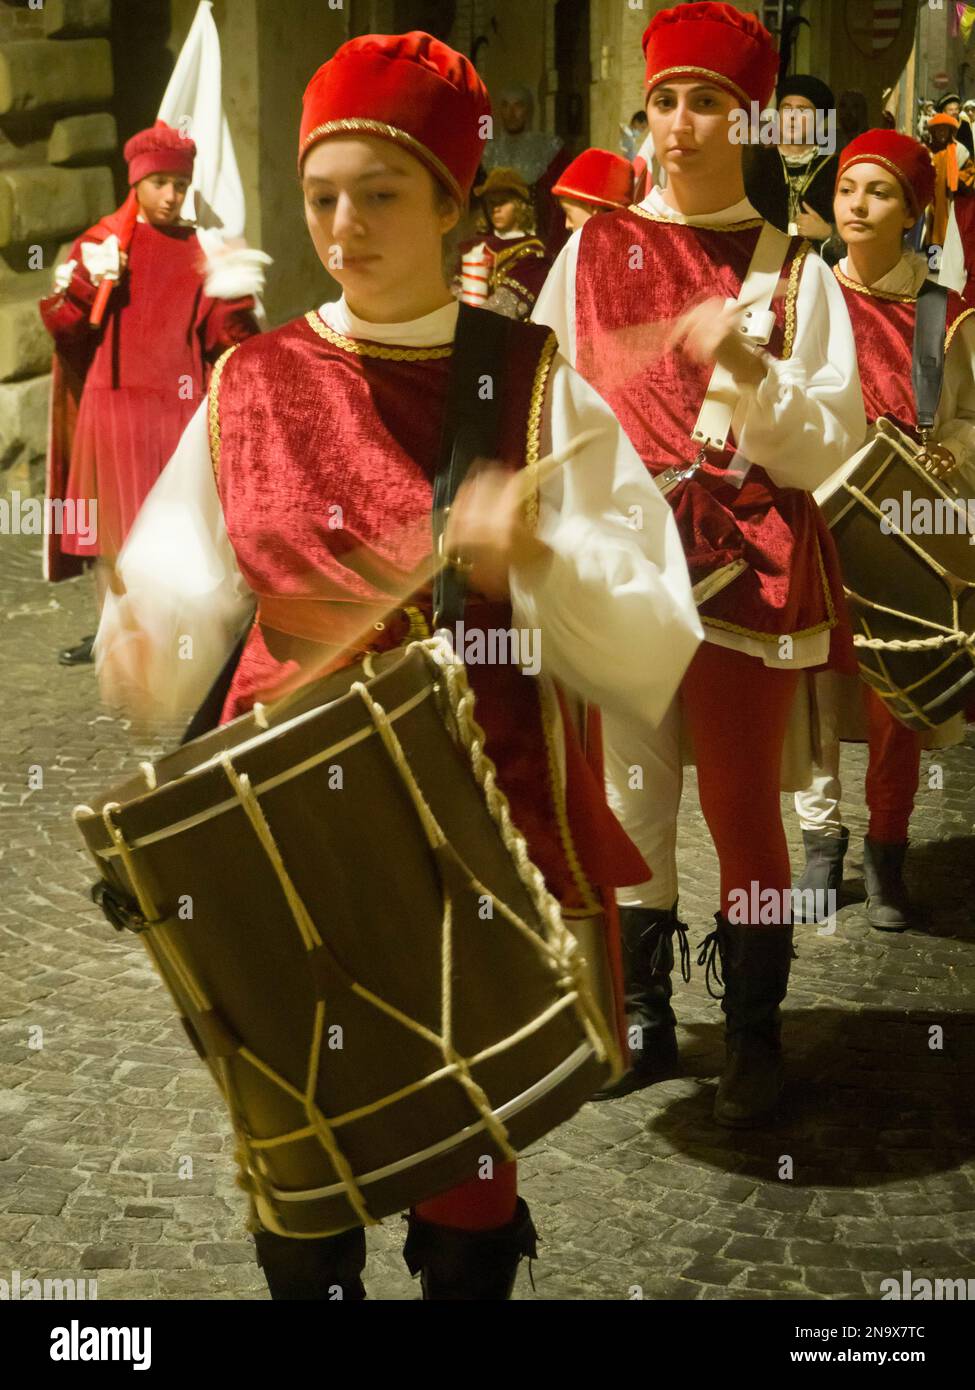 Young drummers parading in historical costumes throught the city streets at night, Fermo, Marche, Italy © Renzo Frontoni / Axiom Stock Photo